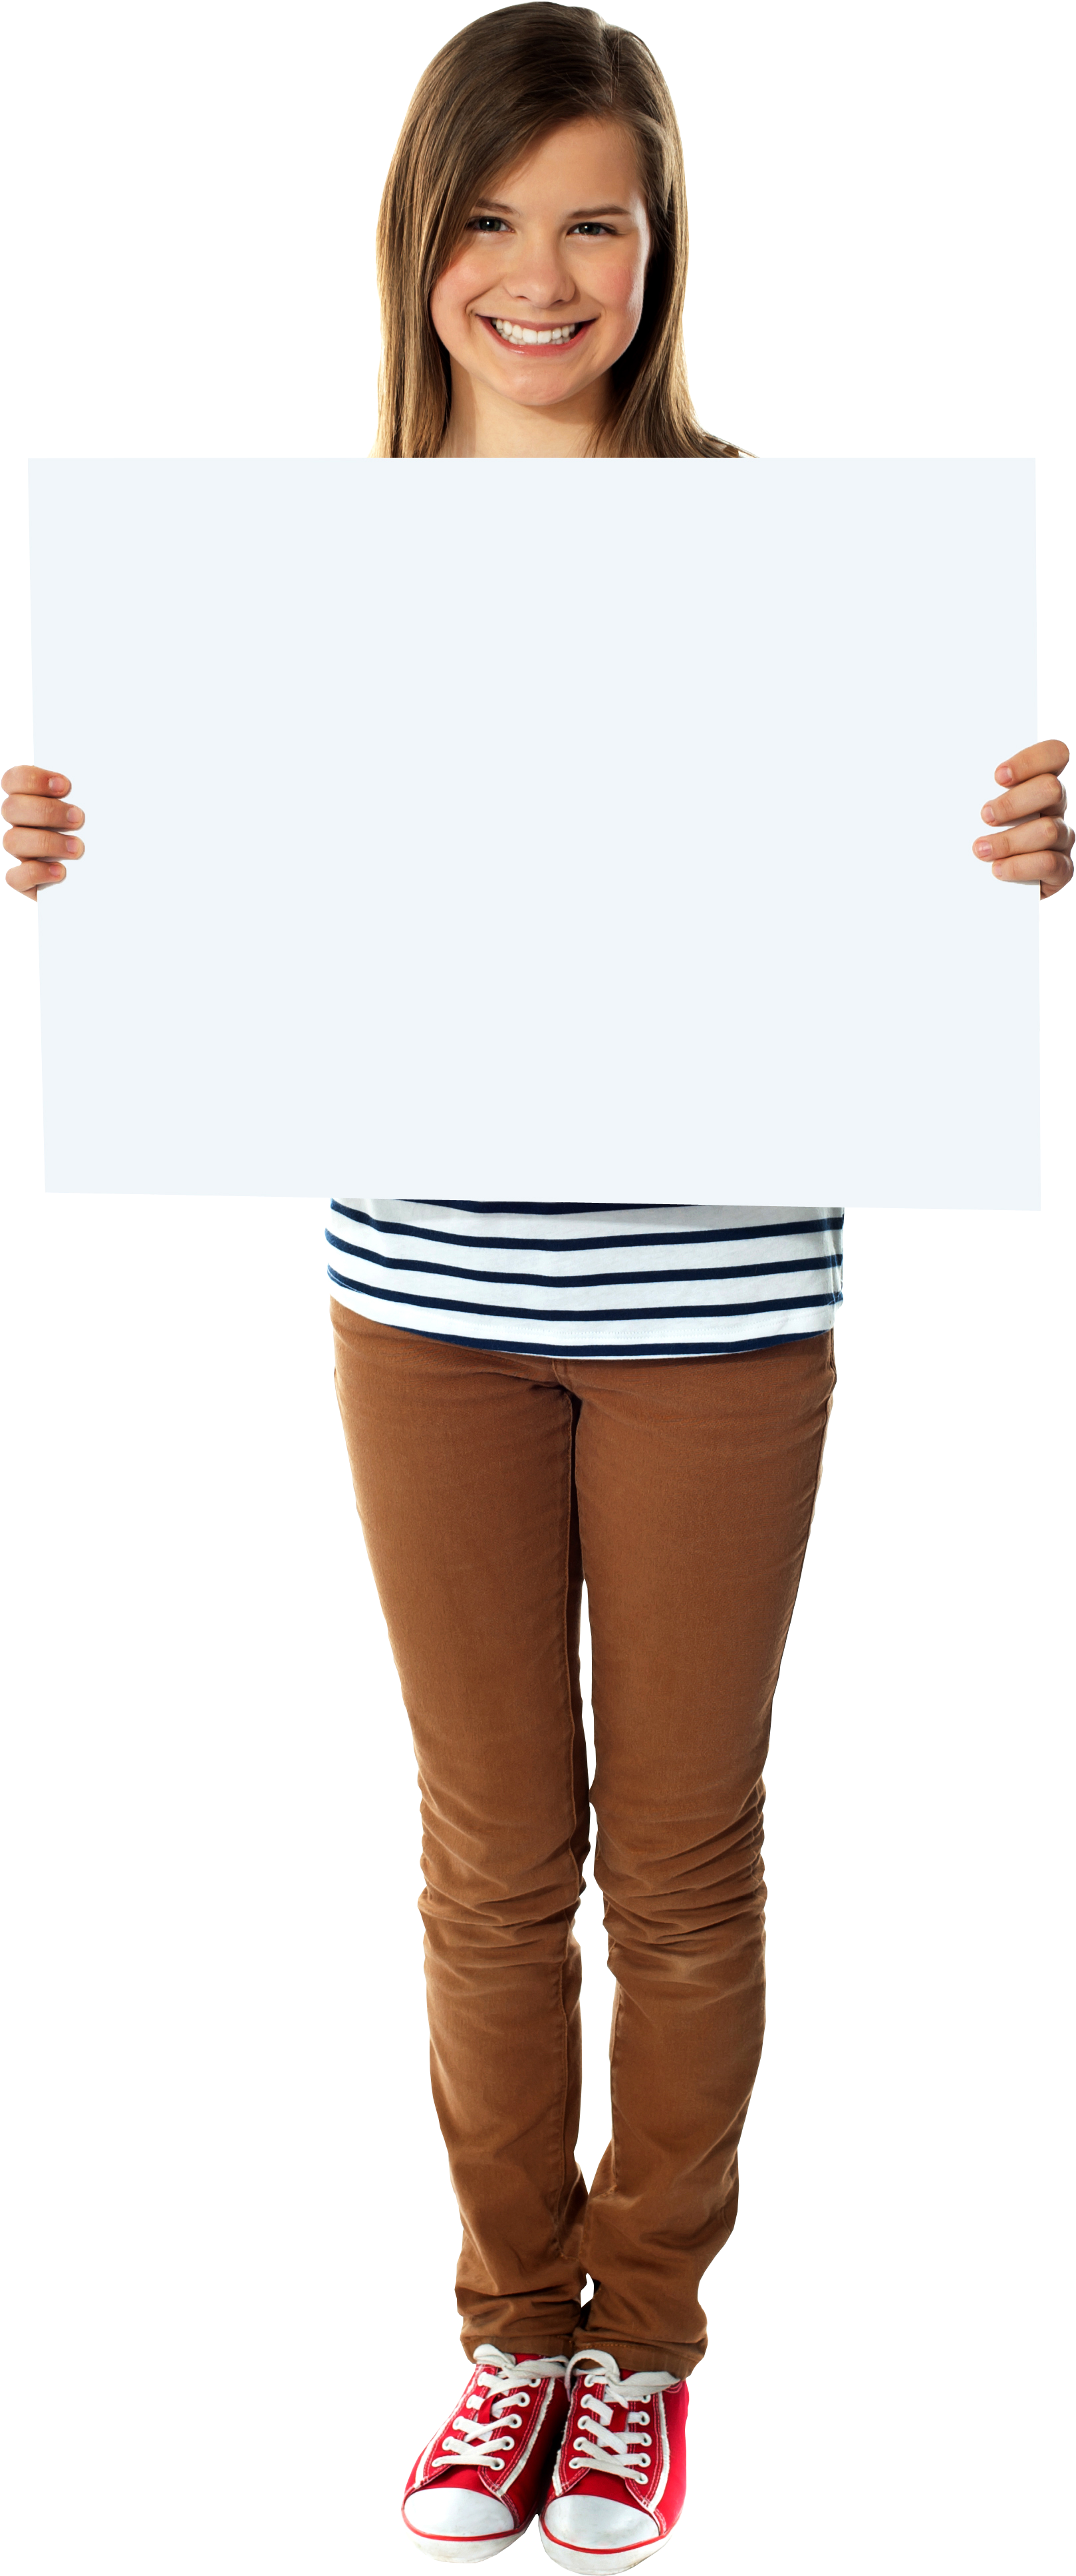 Girl Holding Banner Png Image - Portable Network Graphics (2535x4203), Png Download